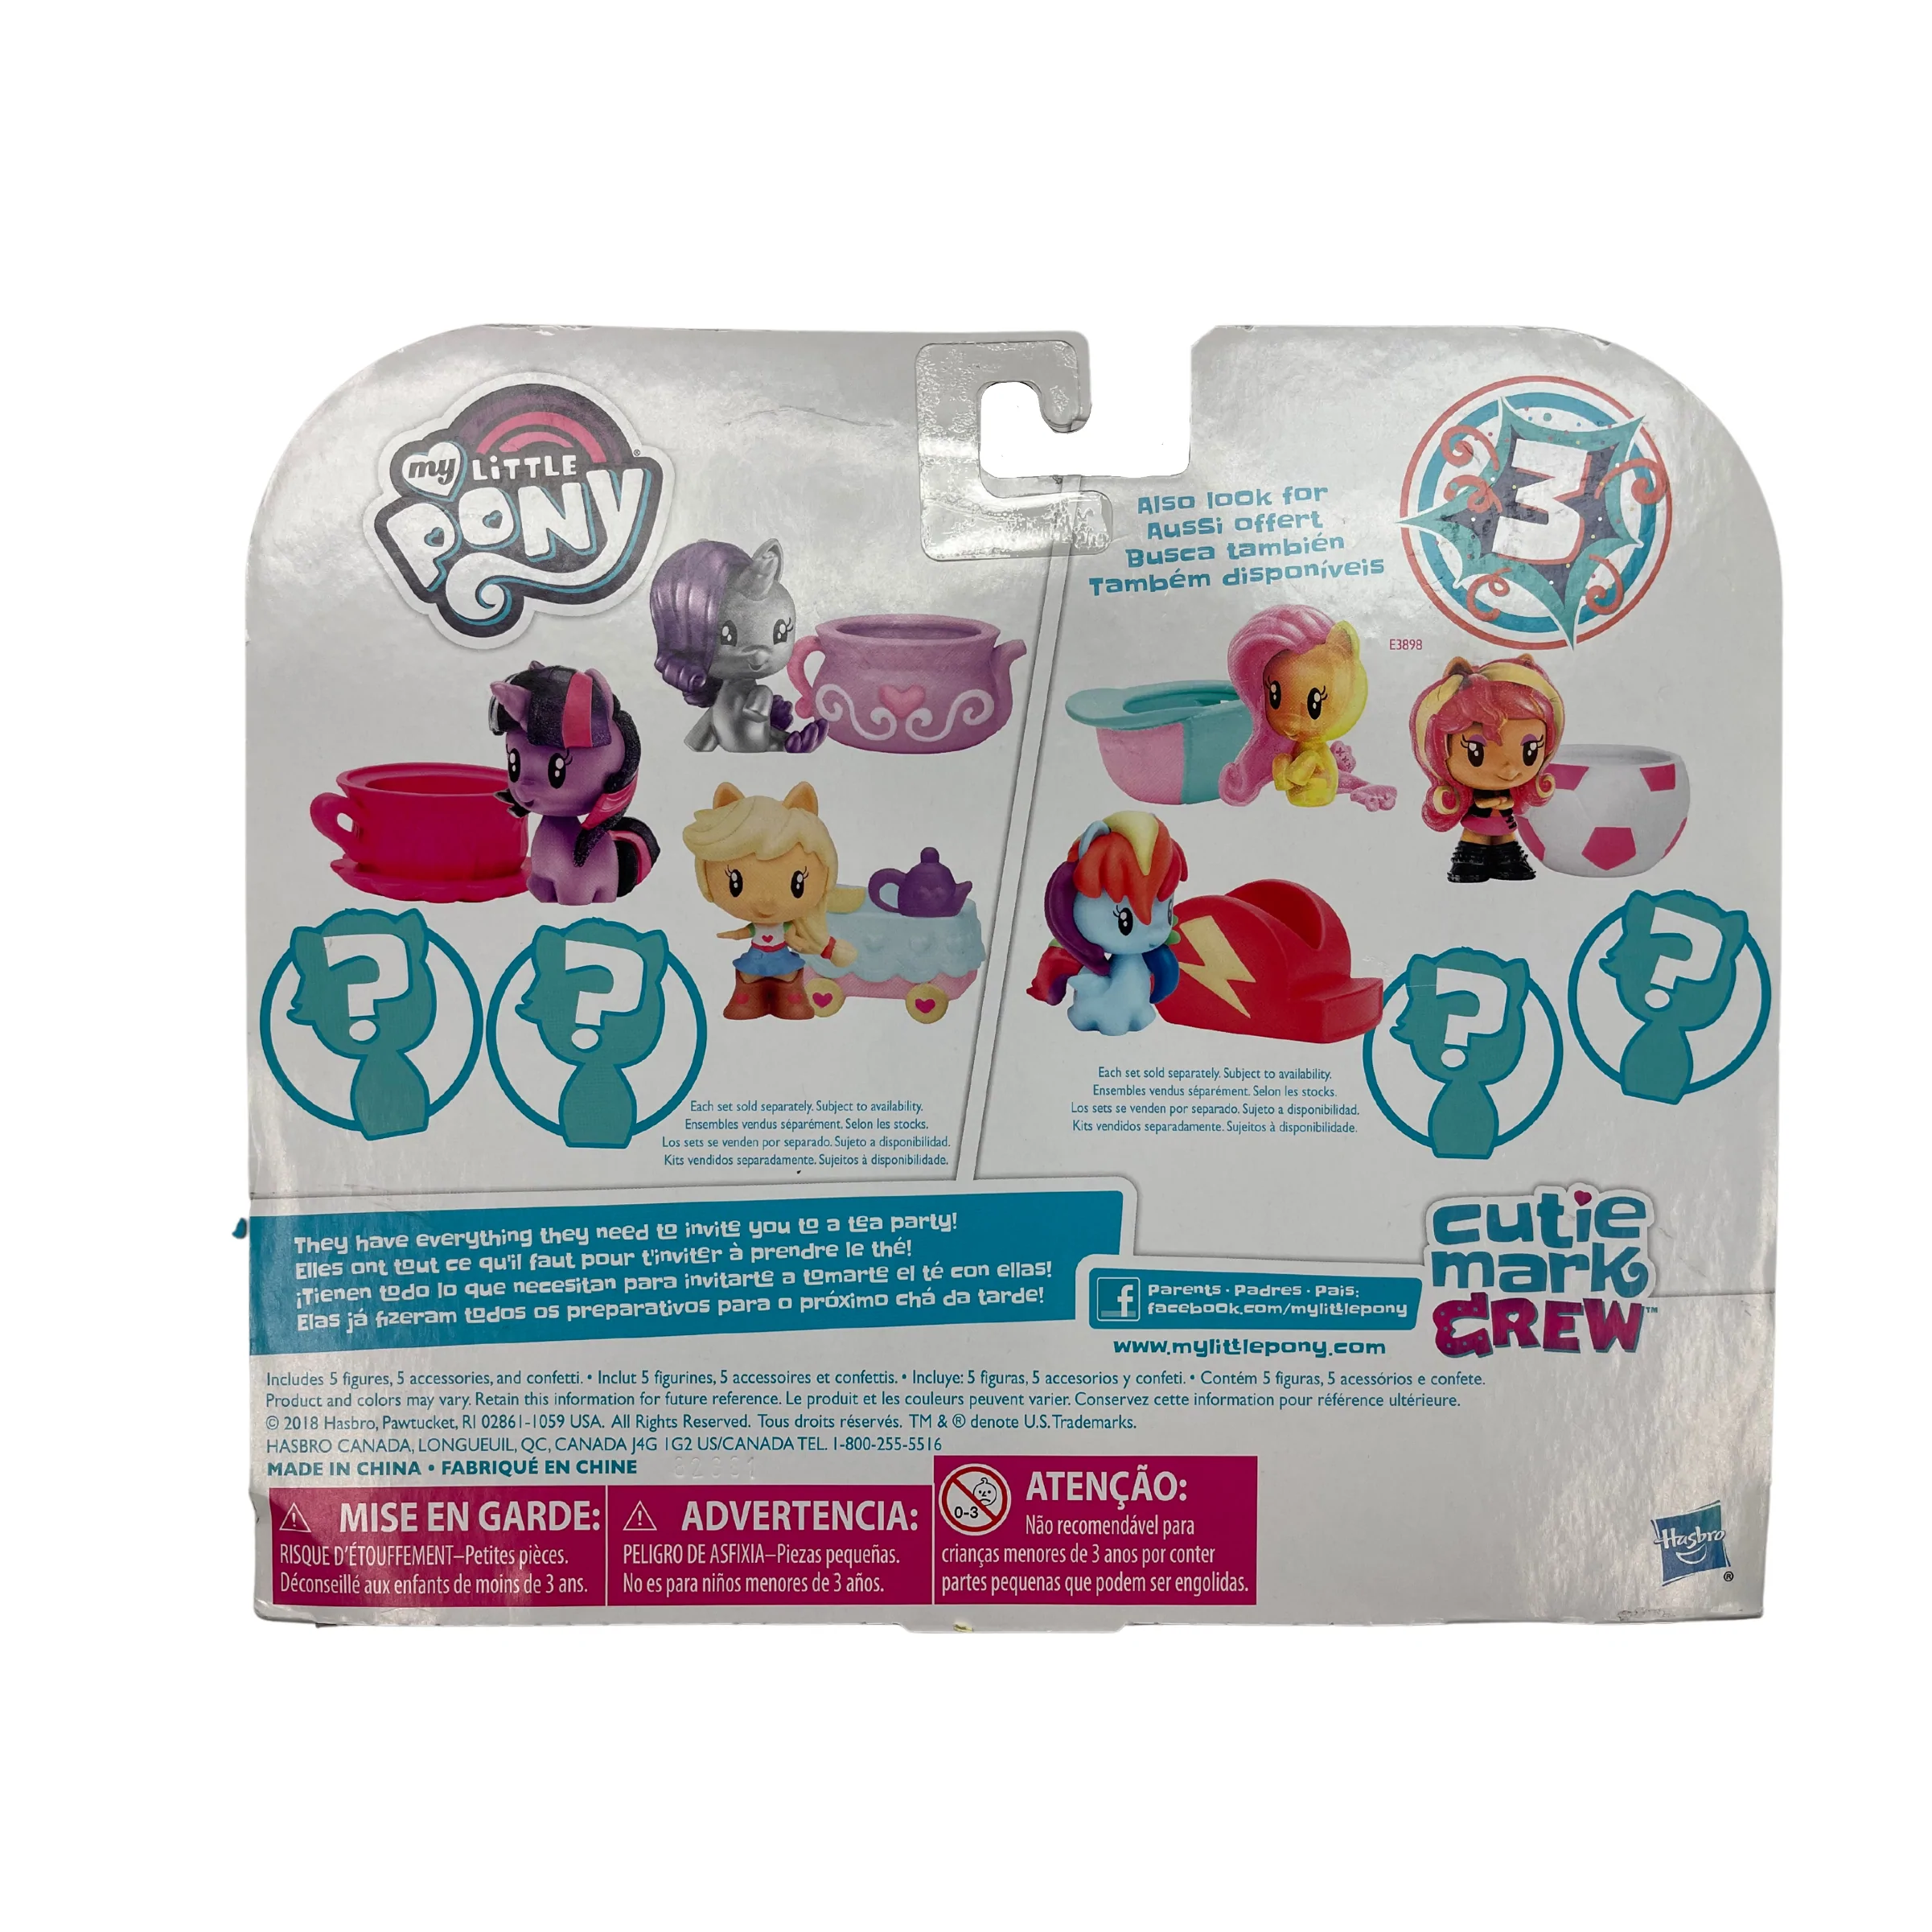 My Little Pony Cutie Mark Crew / Tea Party Set / Surprise Guests with Accessories